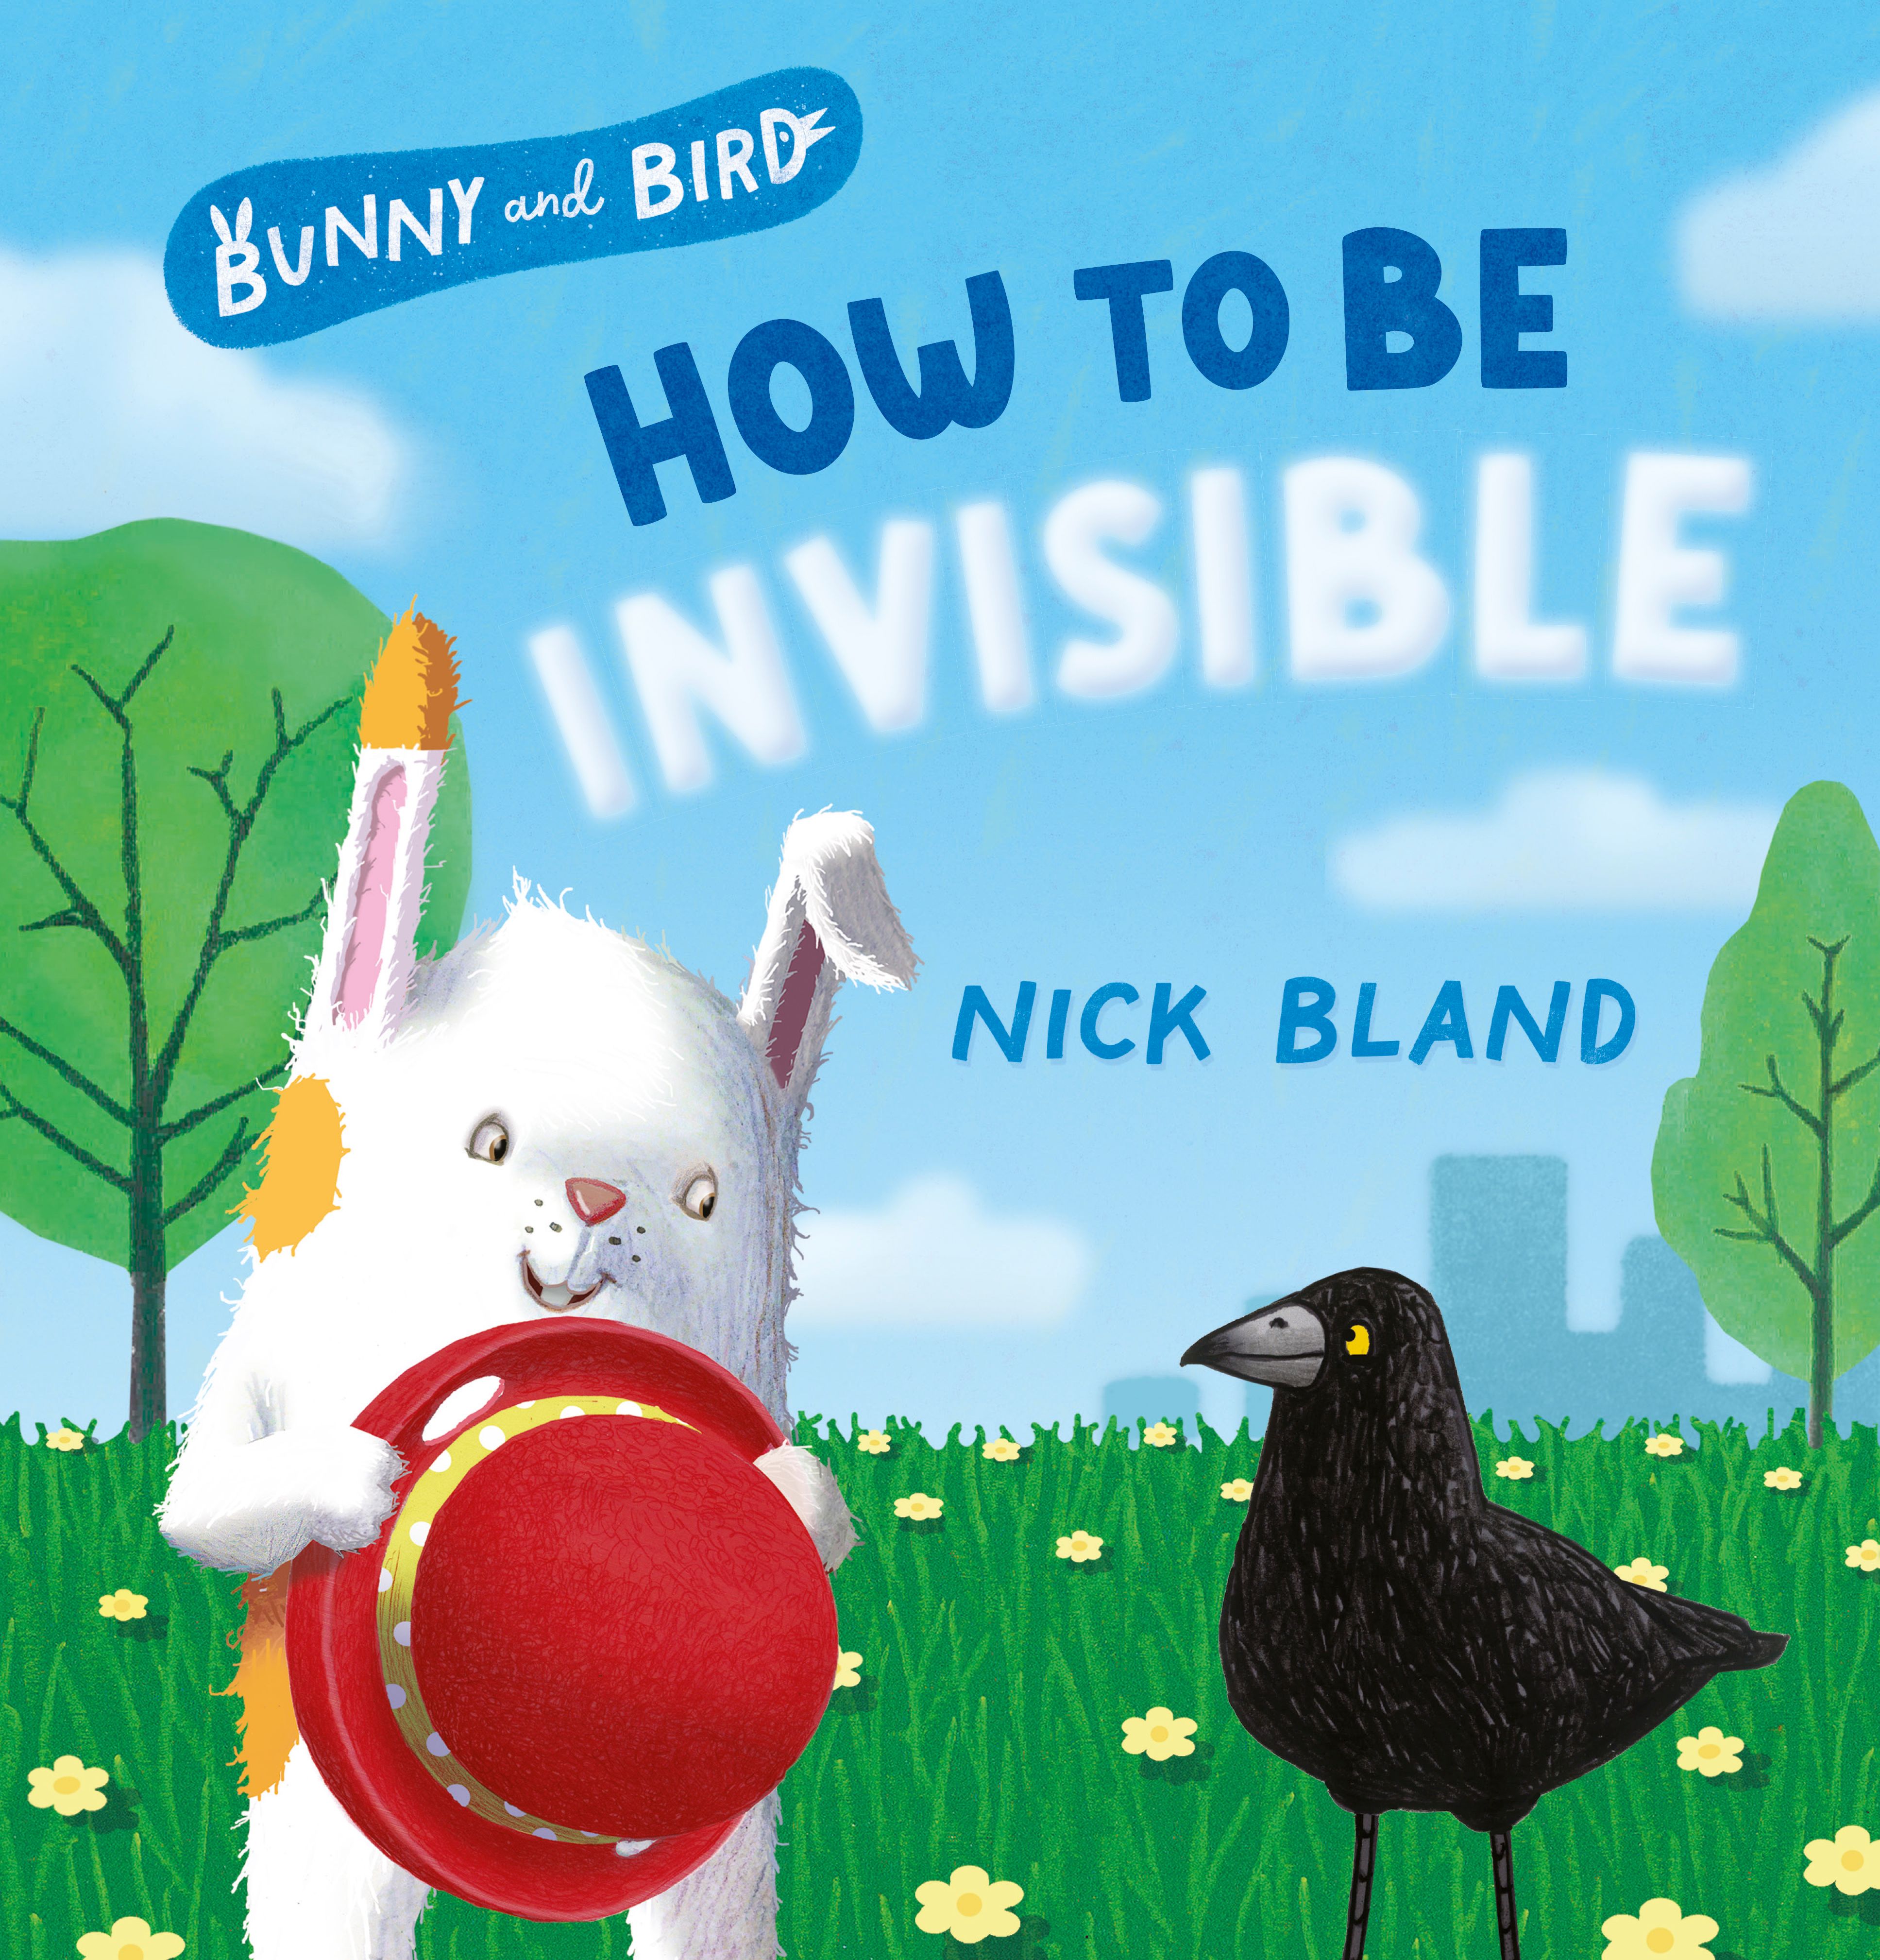 Bunny and Bird 2: How to be Invisible by Nick Bland